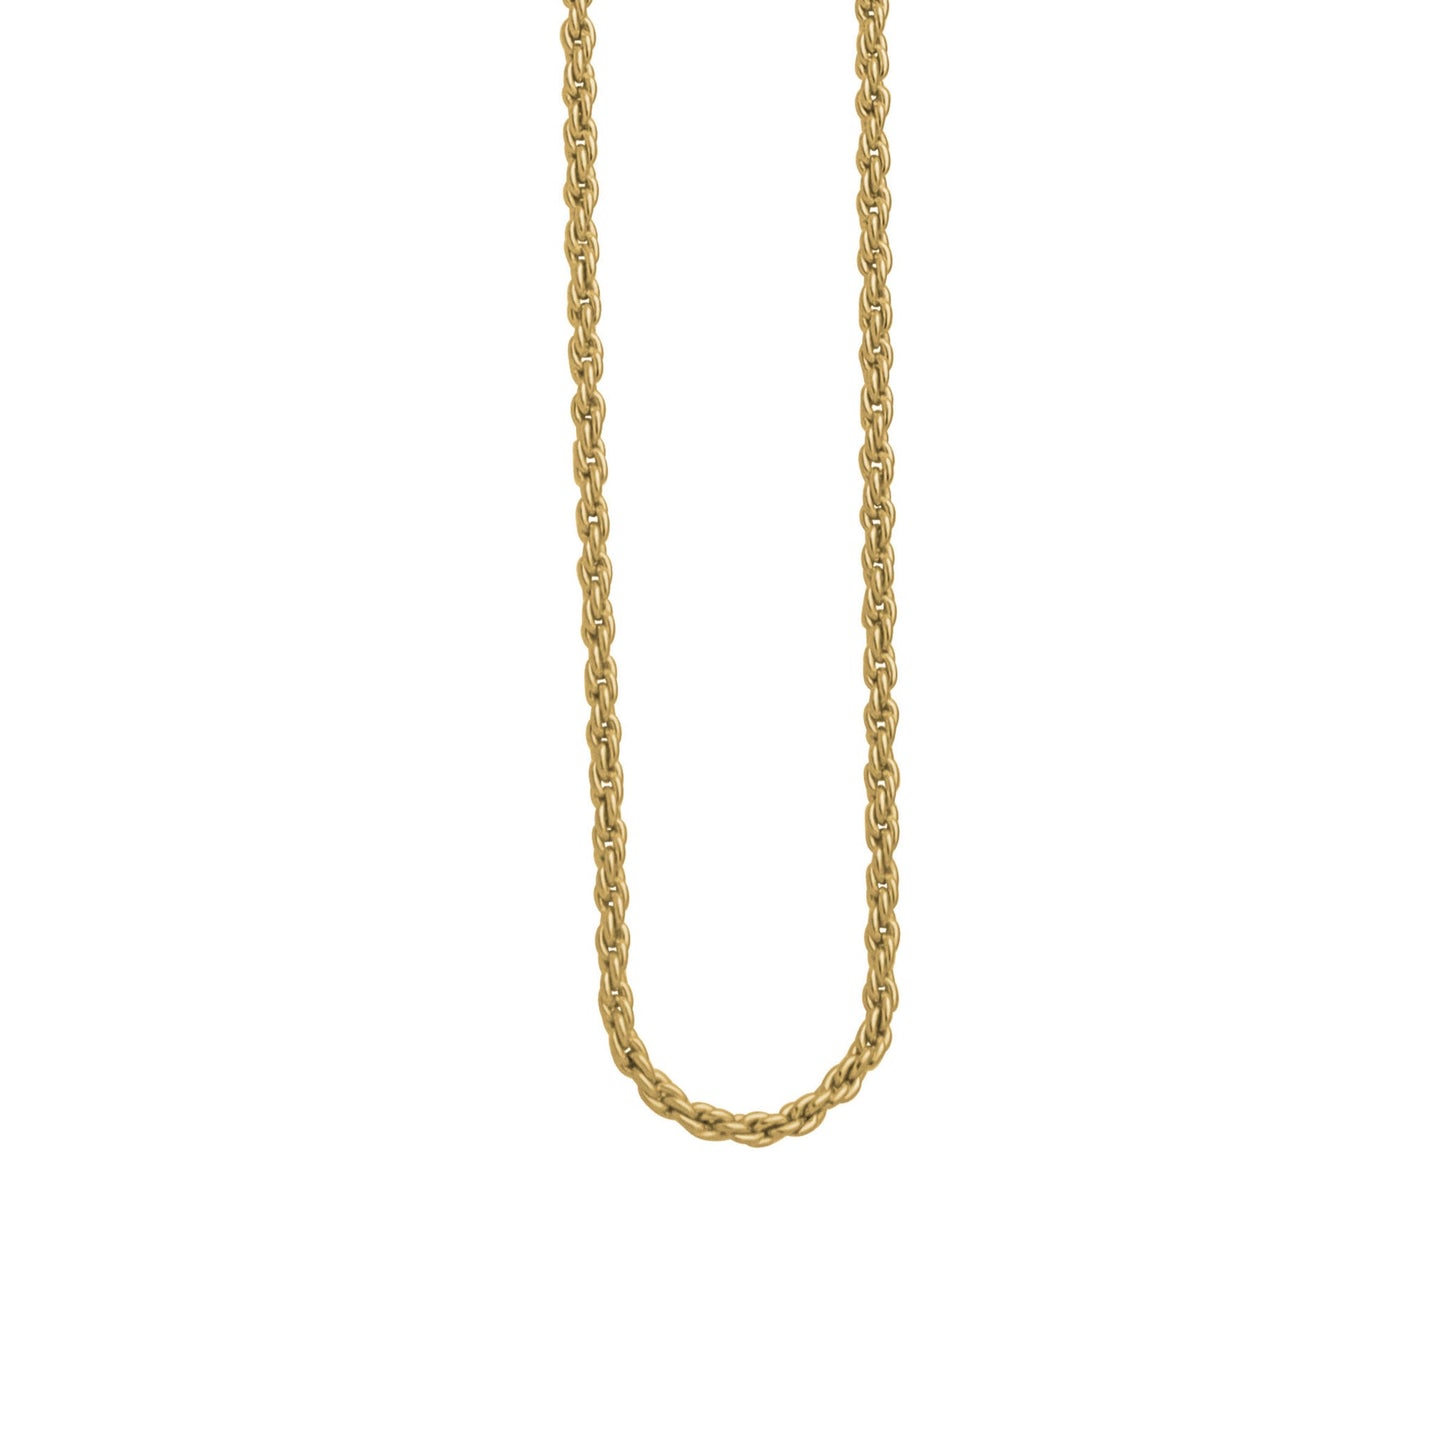 A 18" 2mm french rope chain displayed on a neutral white background.